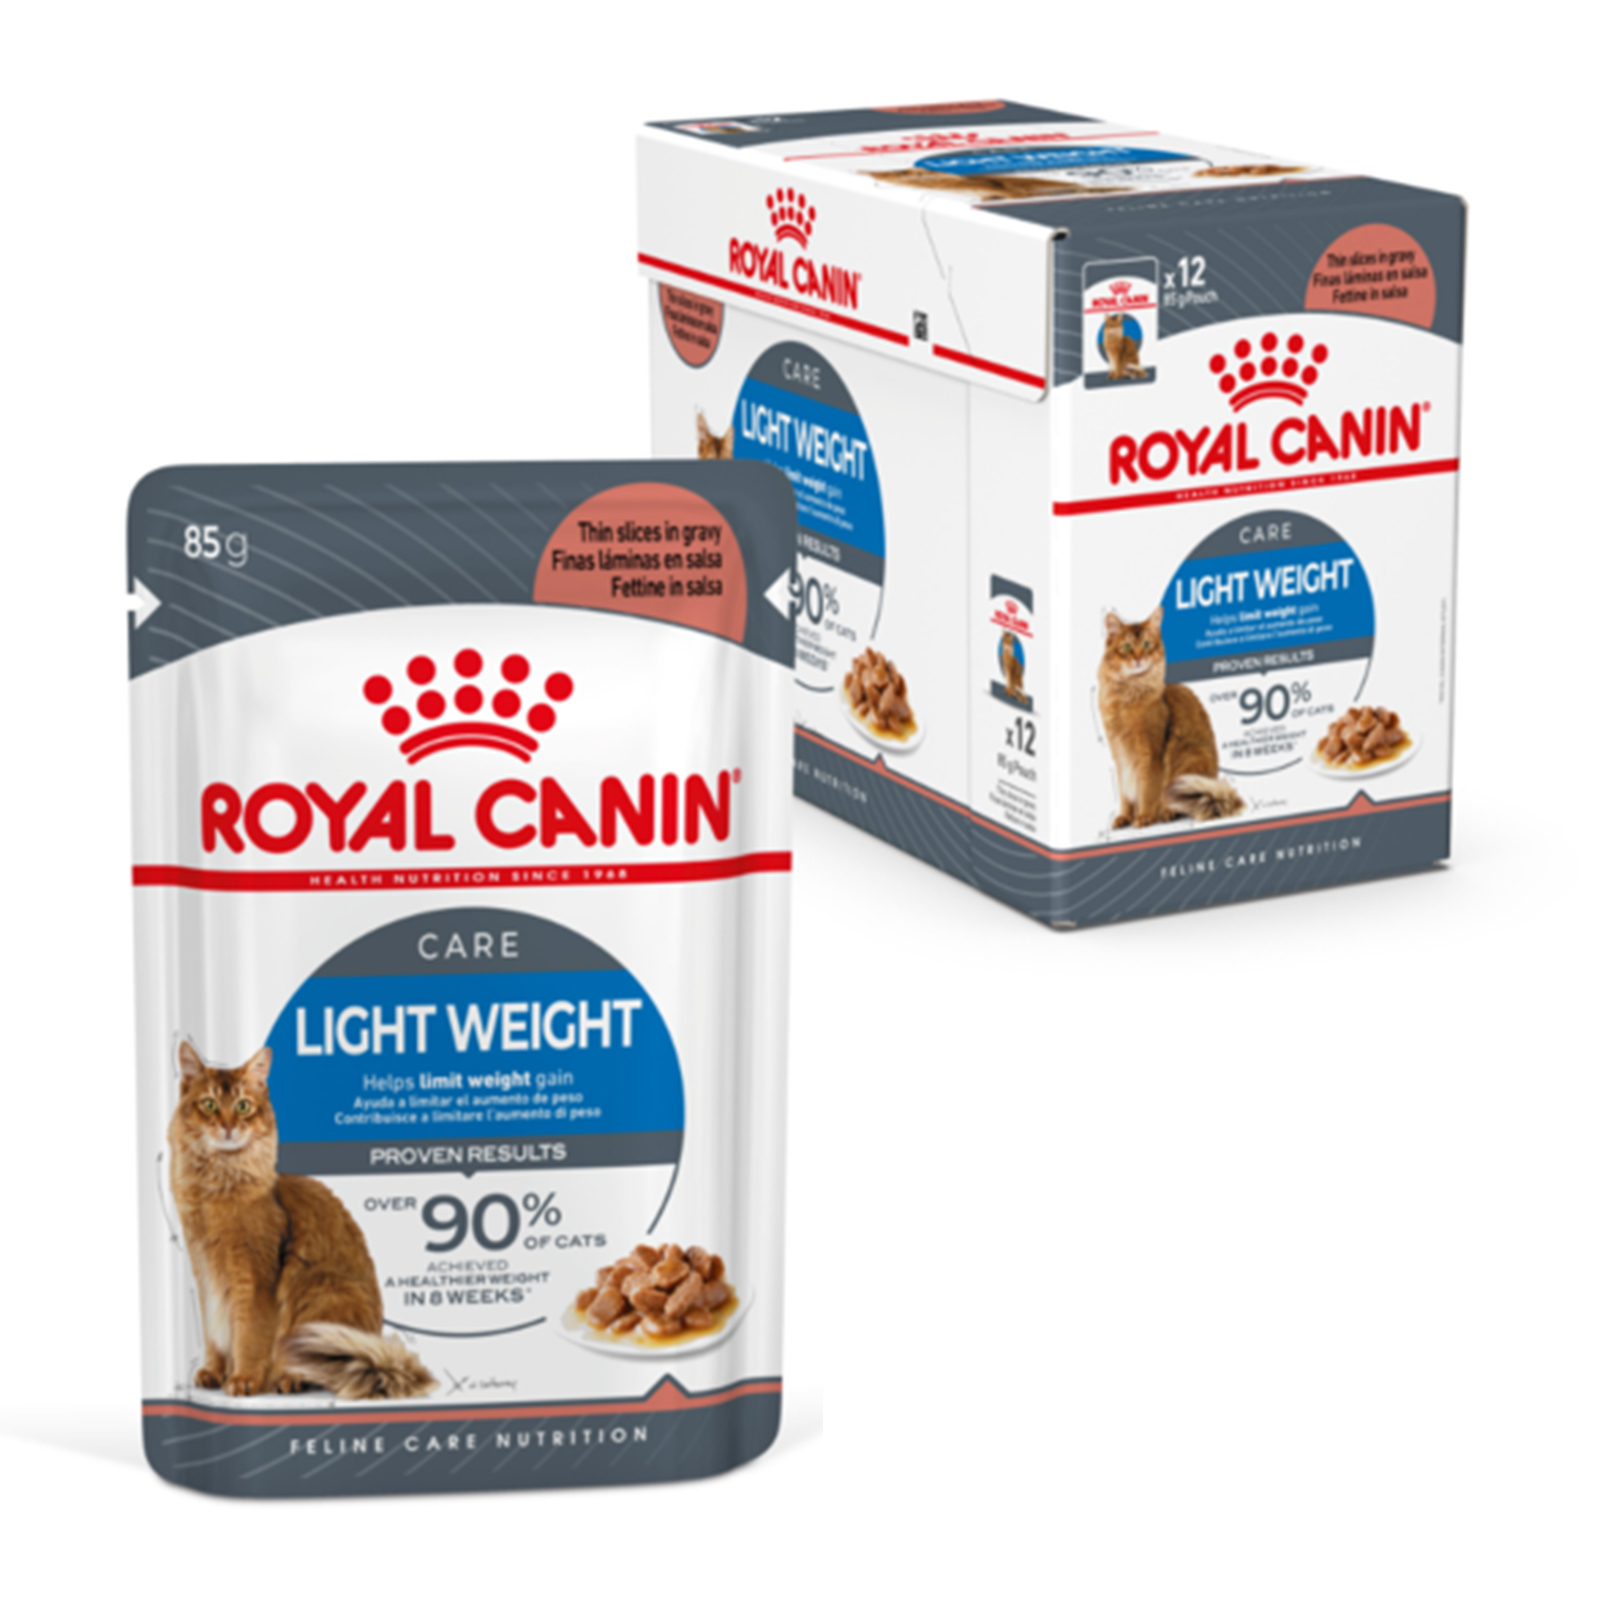 Royal Canin Size Health Nutrition X-Small Thin Slices in Gravy Wet